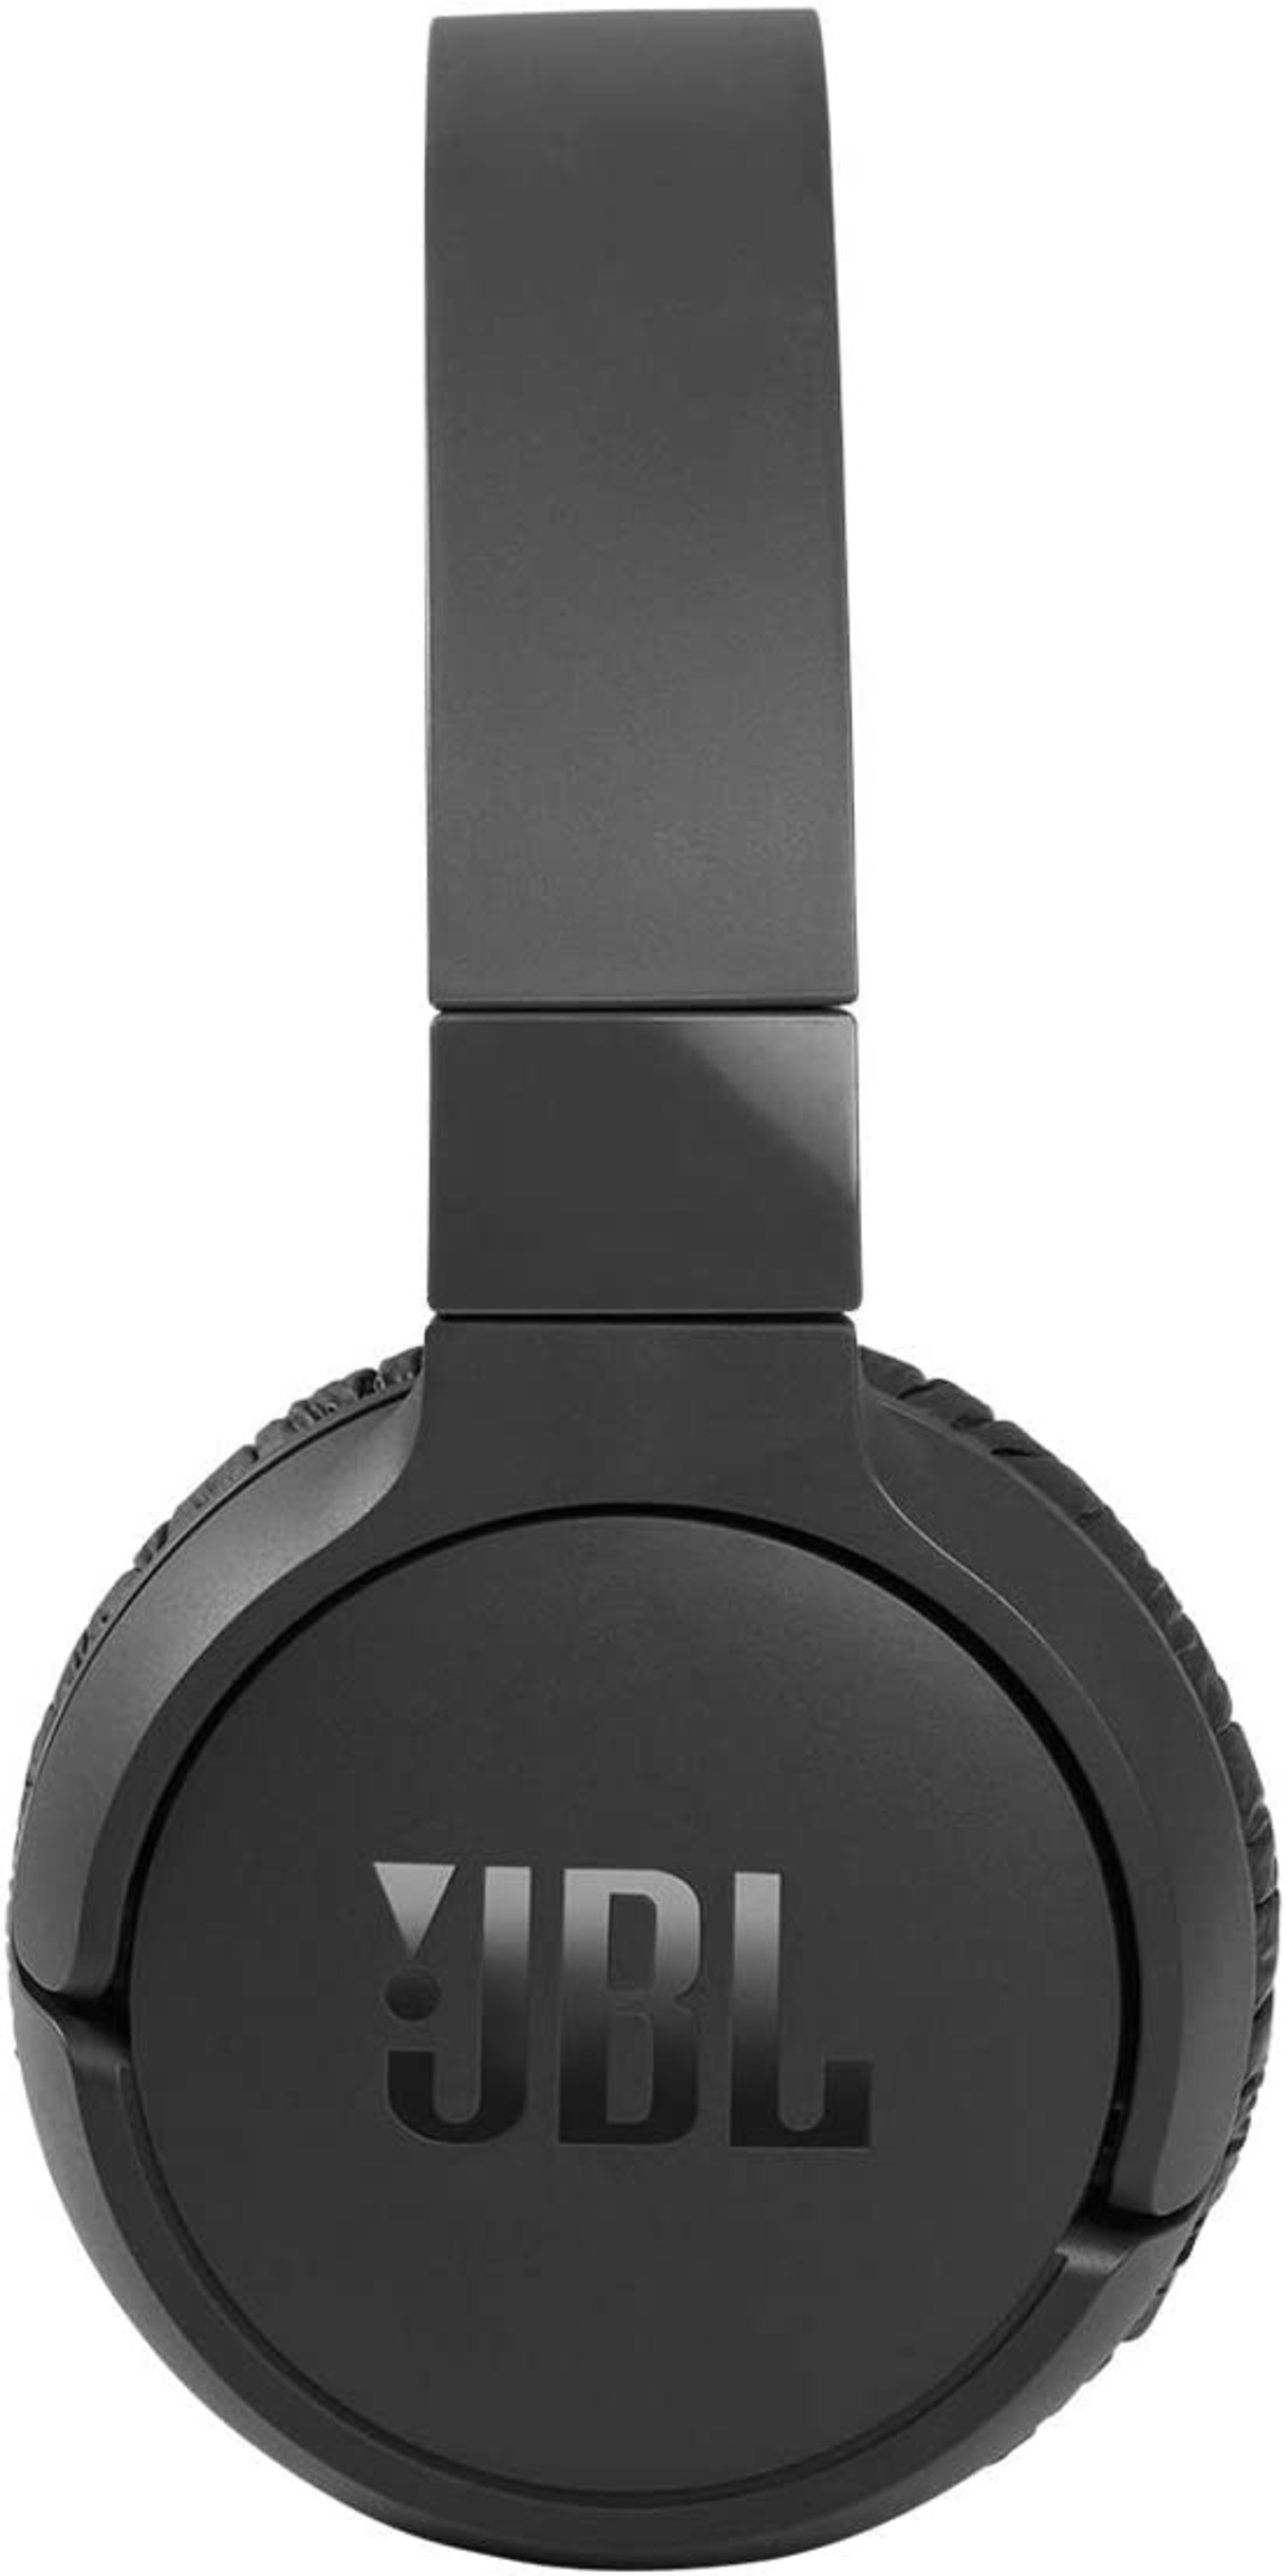 JBL TUNE 510BT Wireless On-Ear Headphones with Pure bass Sound Black, NEW